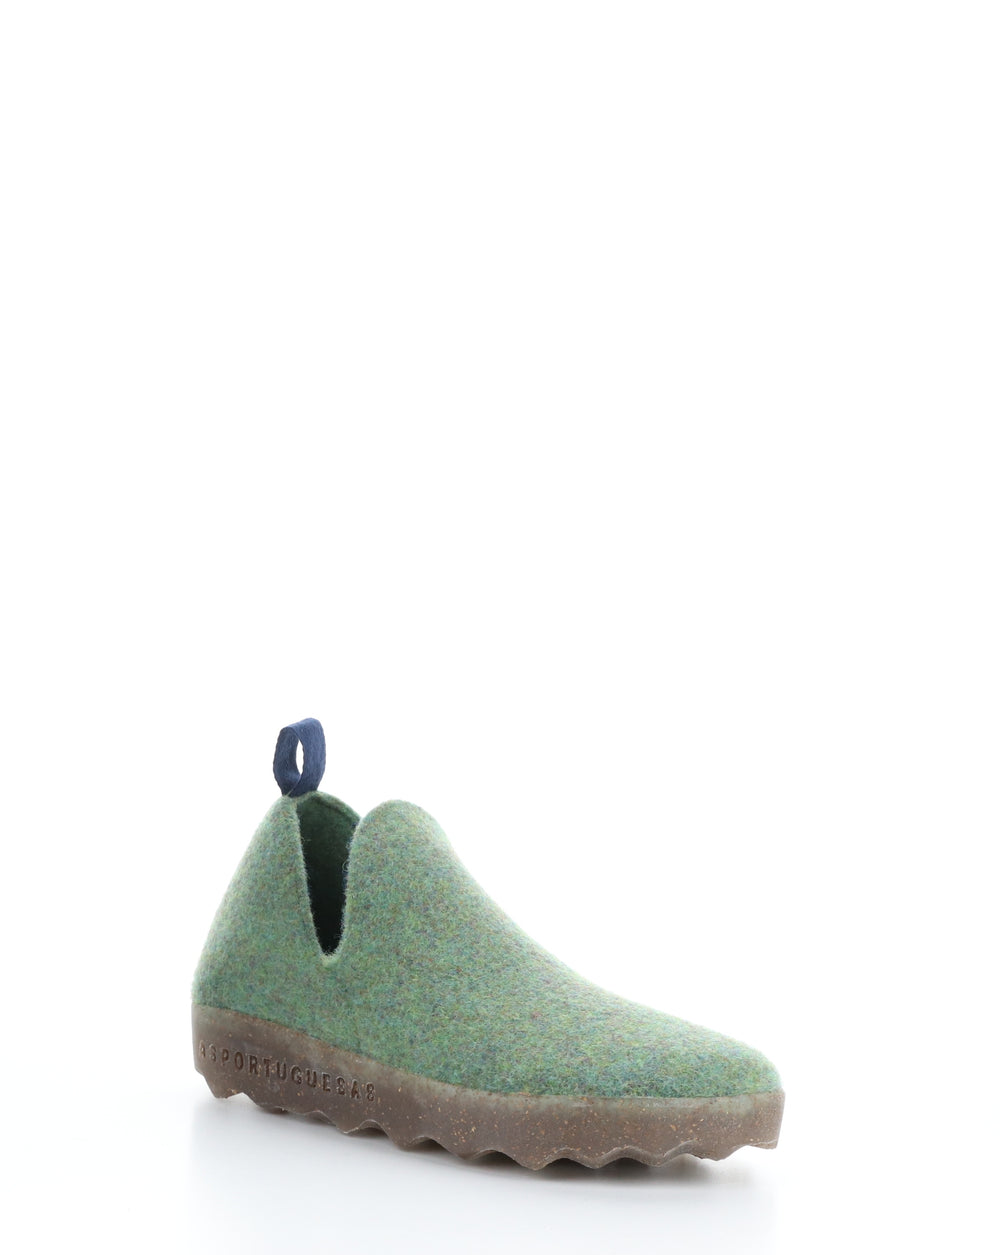 CITY Green Round Toe Shoes